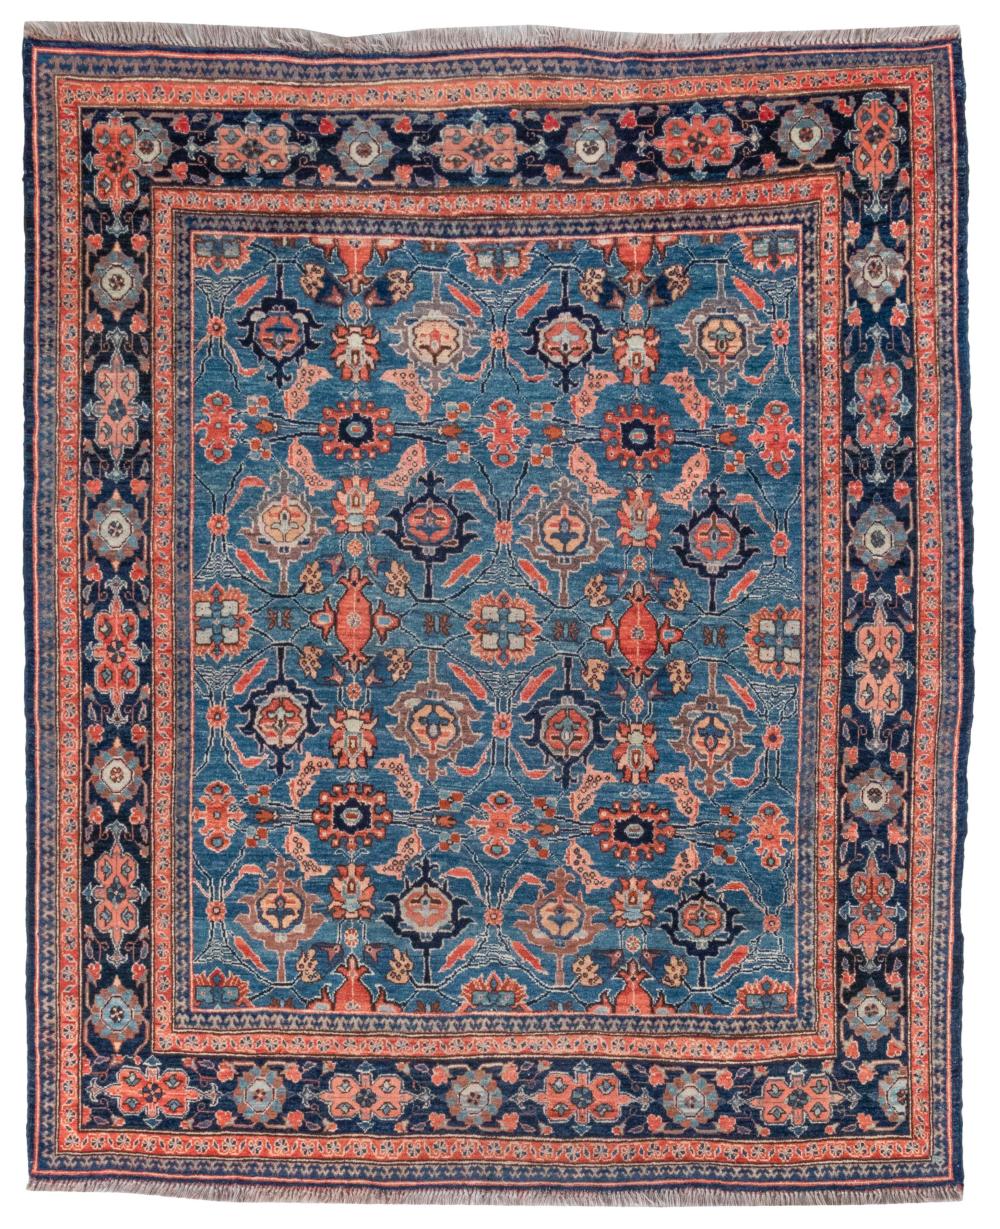 AFGHANI RUG IN PERSIAN DESIGN  34d27a